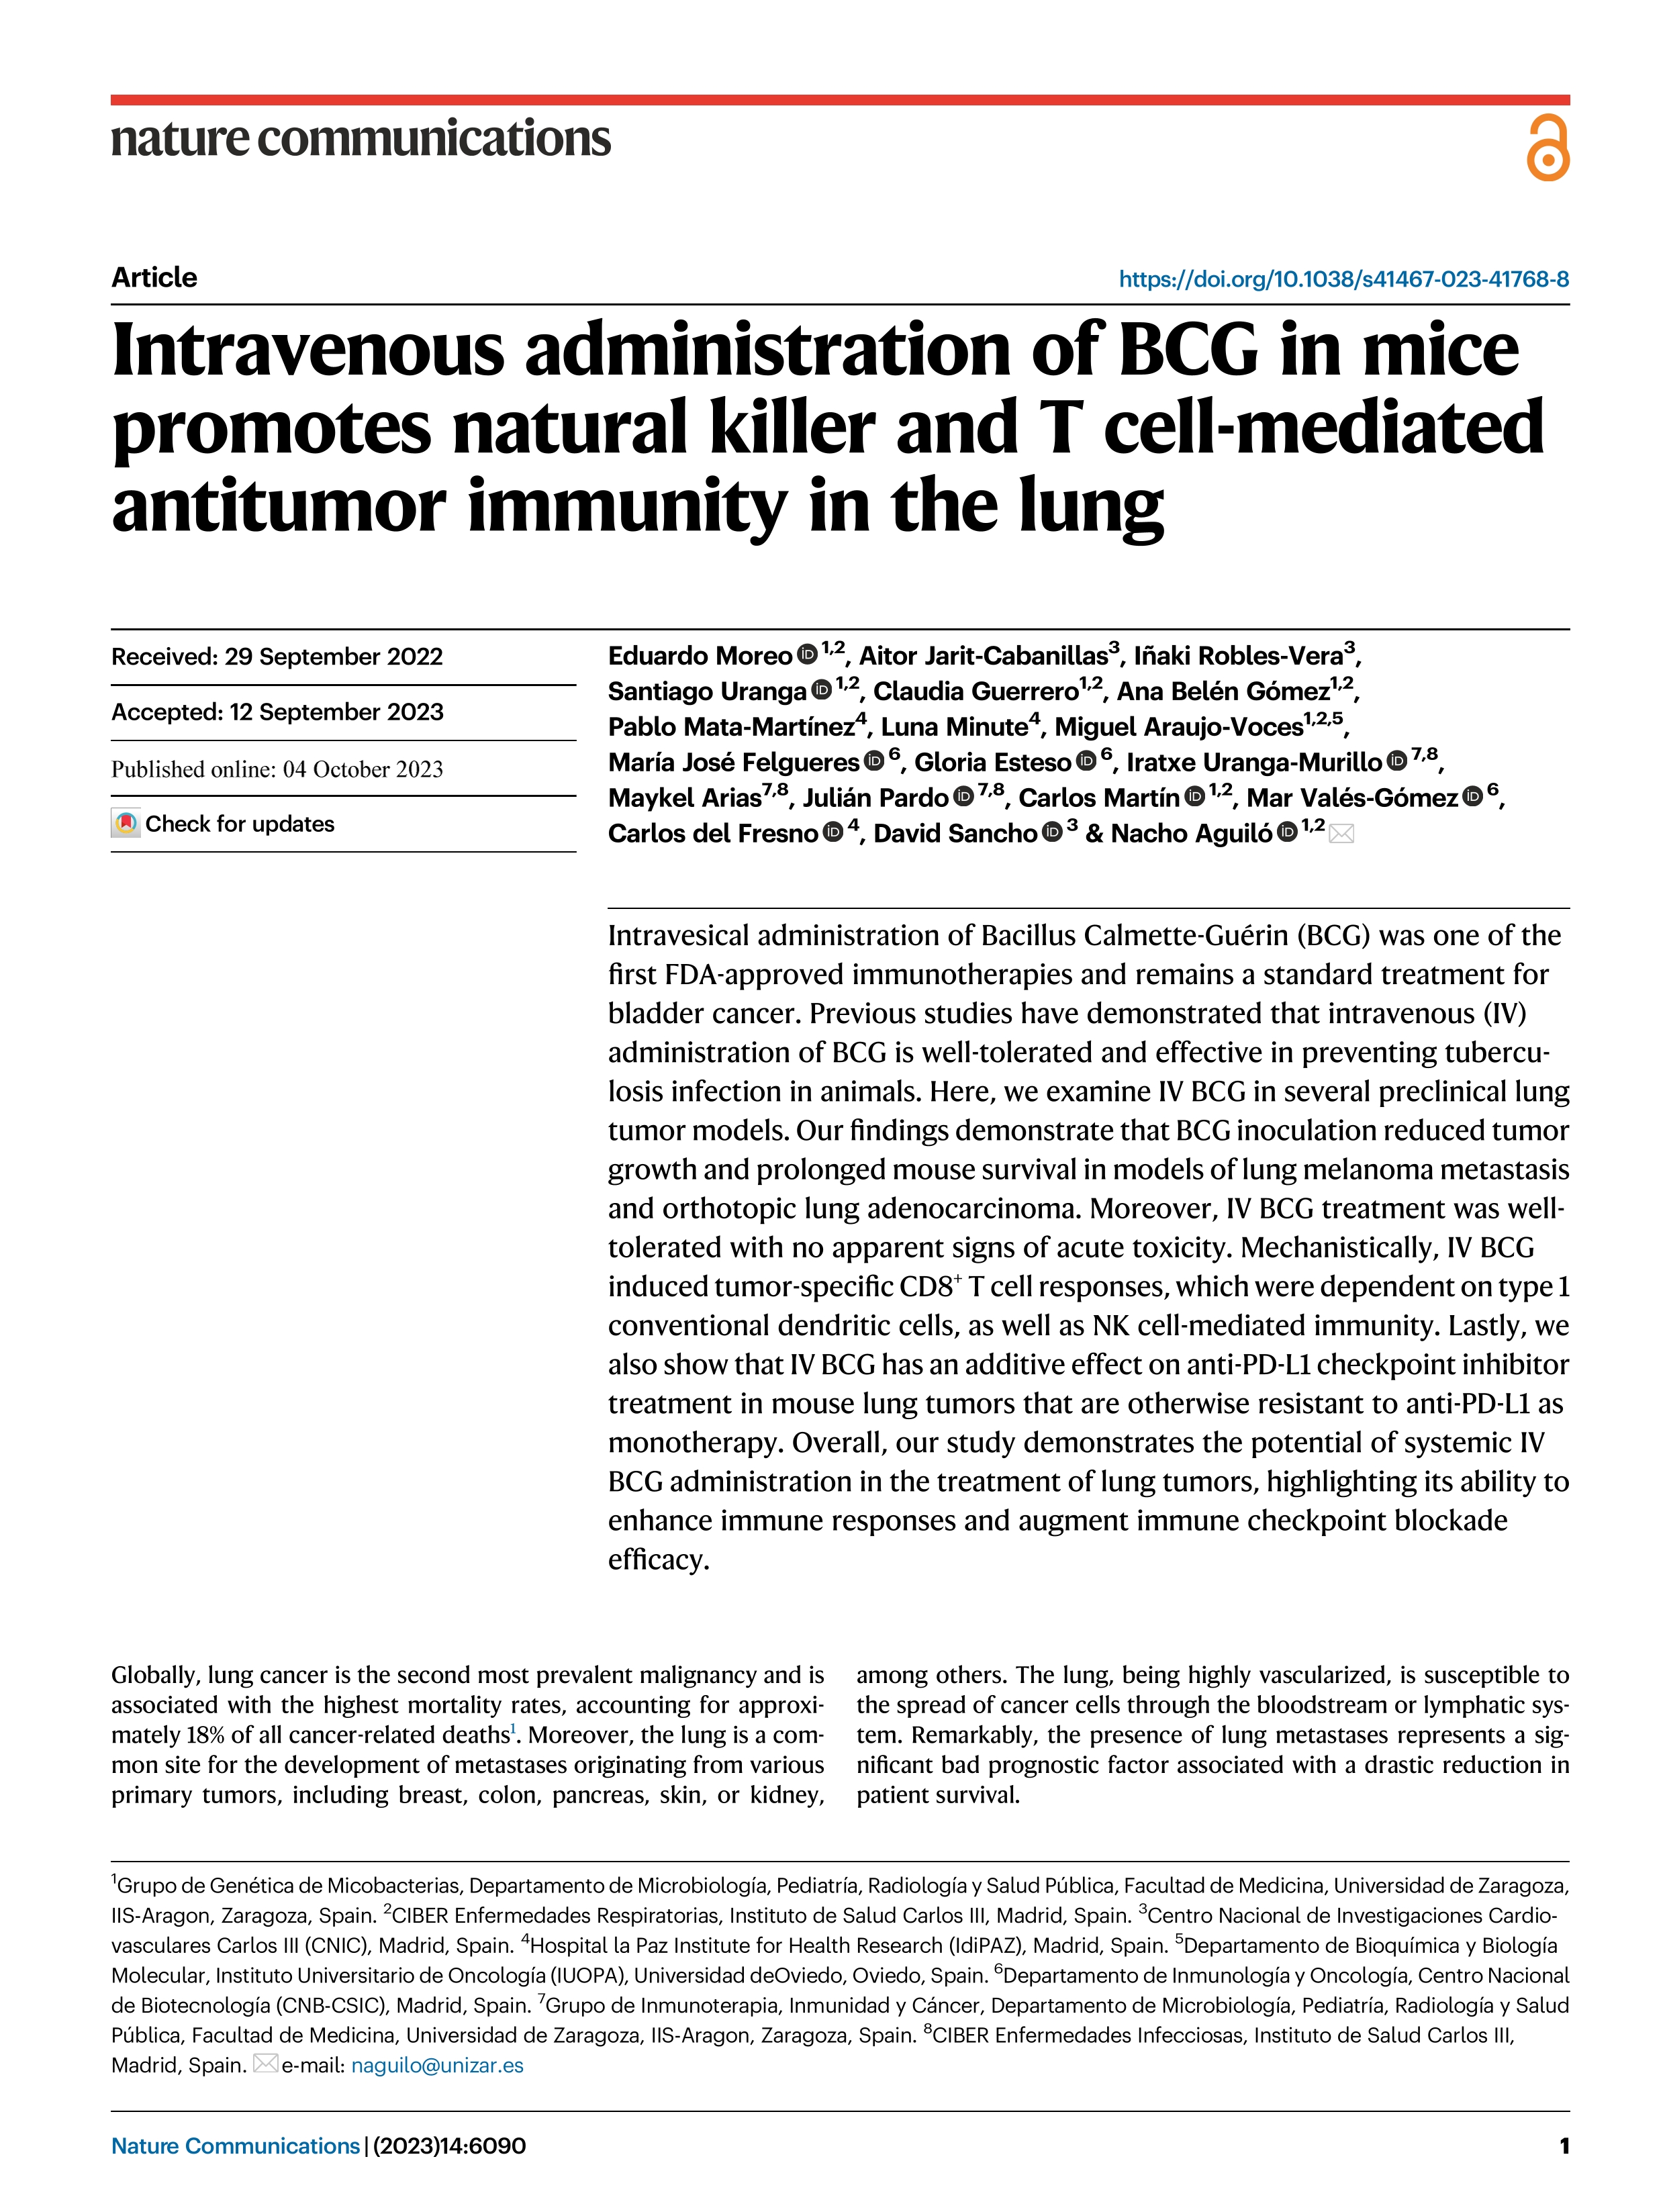 Intravenous administration of BCG in mice promotes natural killer and T cell-mediated antitumor immunity in the lung